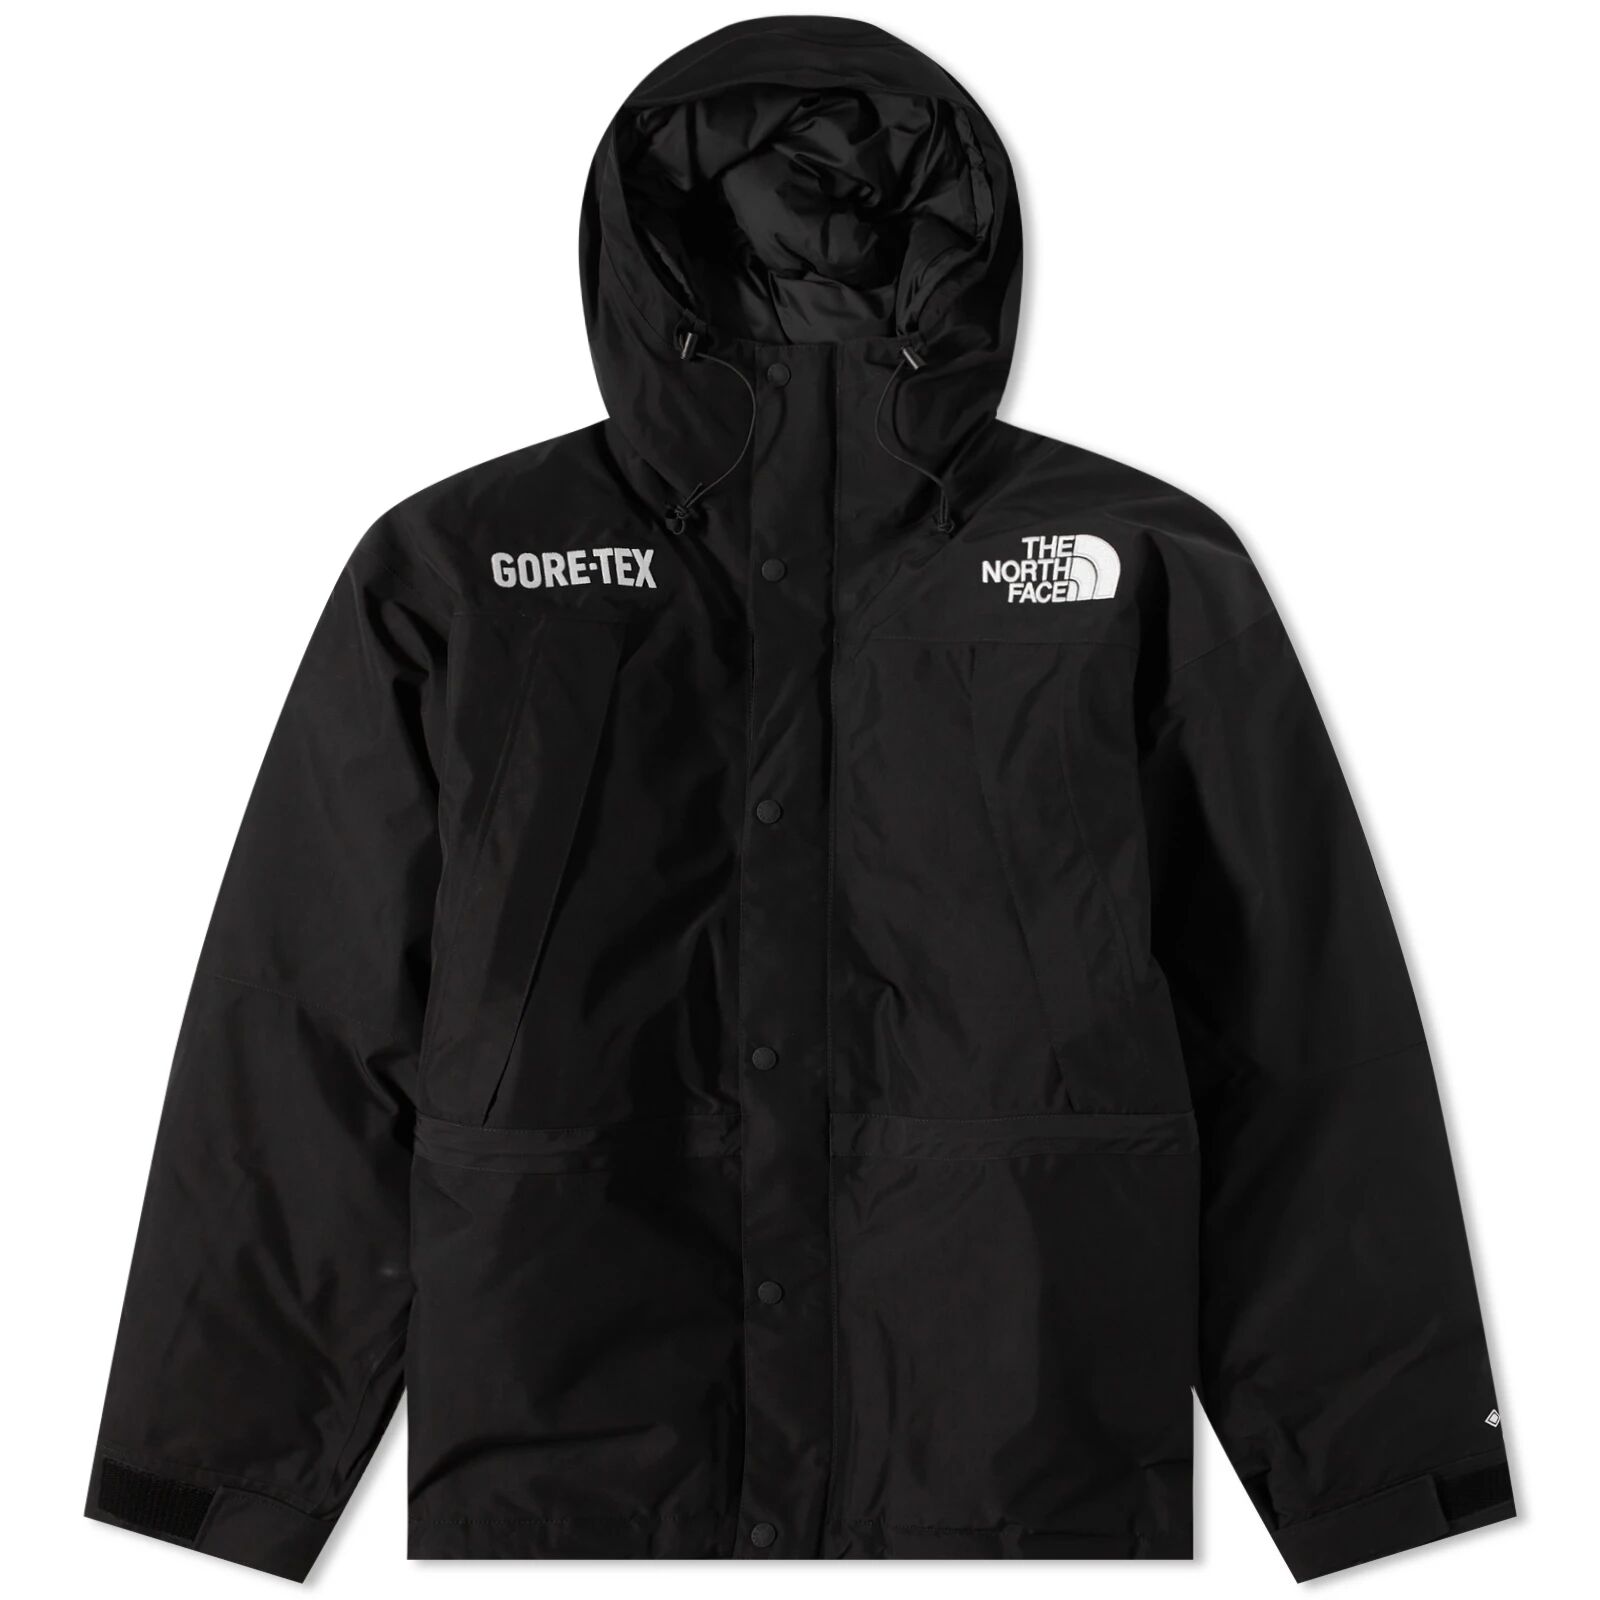 The North Face Men's Gore-Tex Mountain Guide Jacket in Tnf Black, Size X-Large